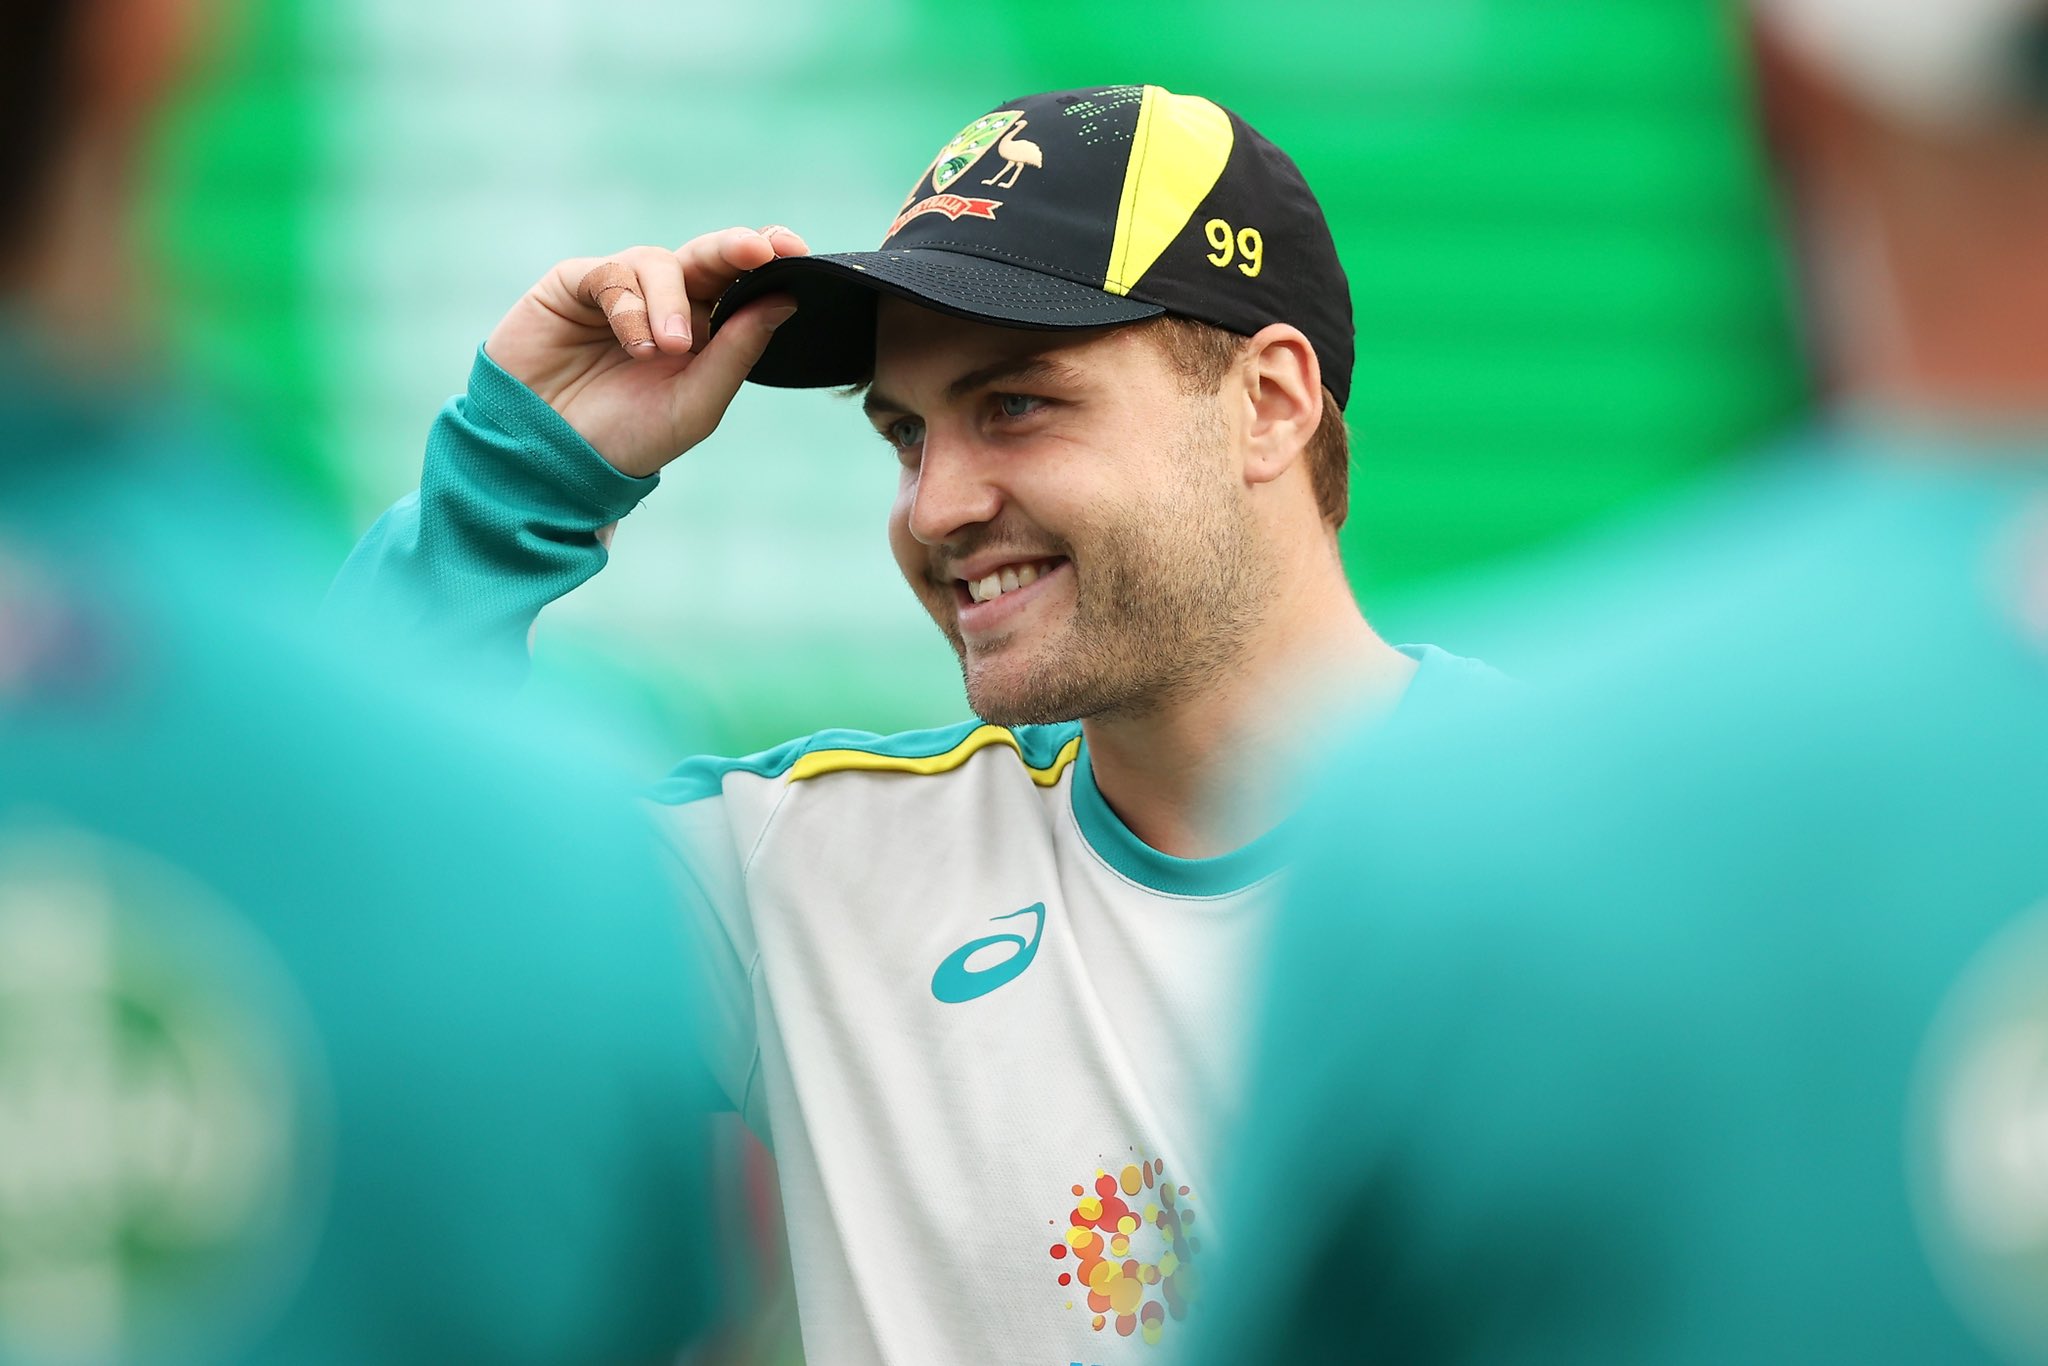 Josh Inglis gets his first central contract from Cricket Australia 